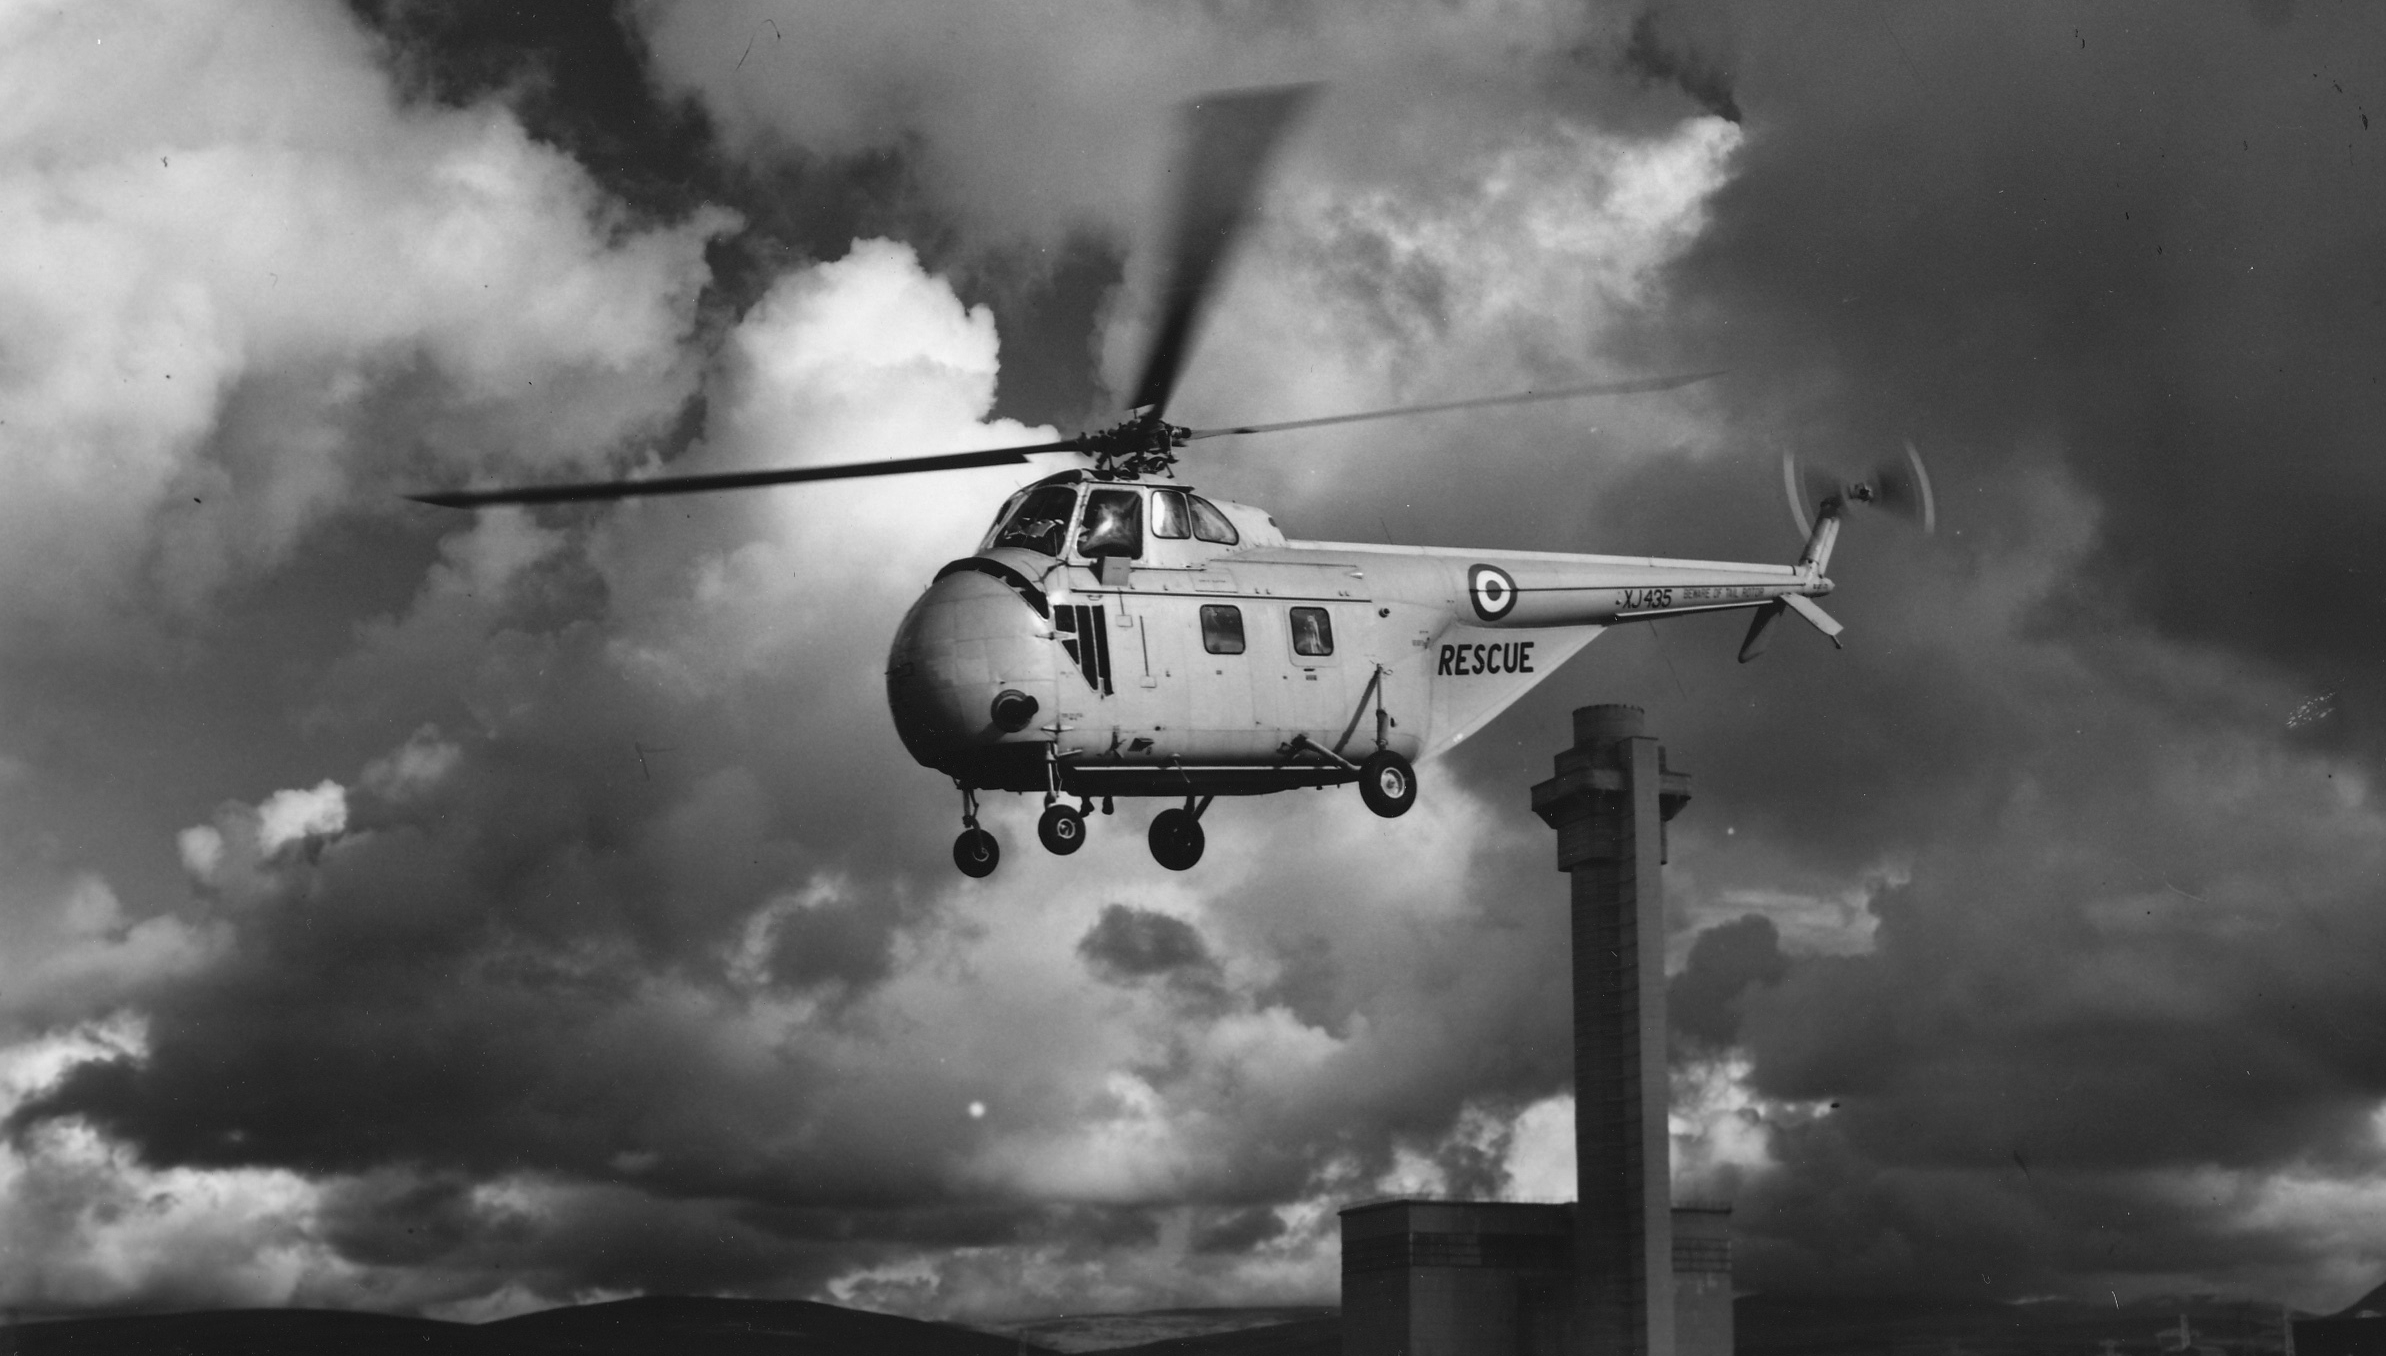 A helicopter of the Royal Air Force taking air samples during the 1957 Windscale fire, with one of the reactors in the background. Image courtesy of Louise Rawling.